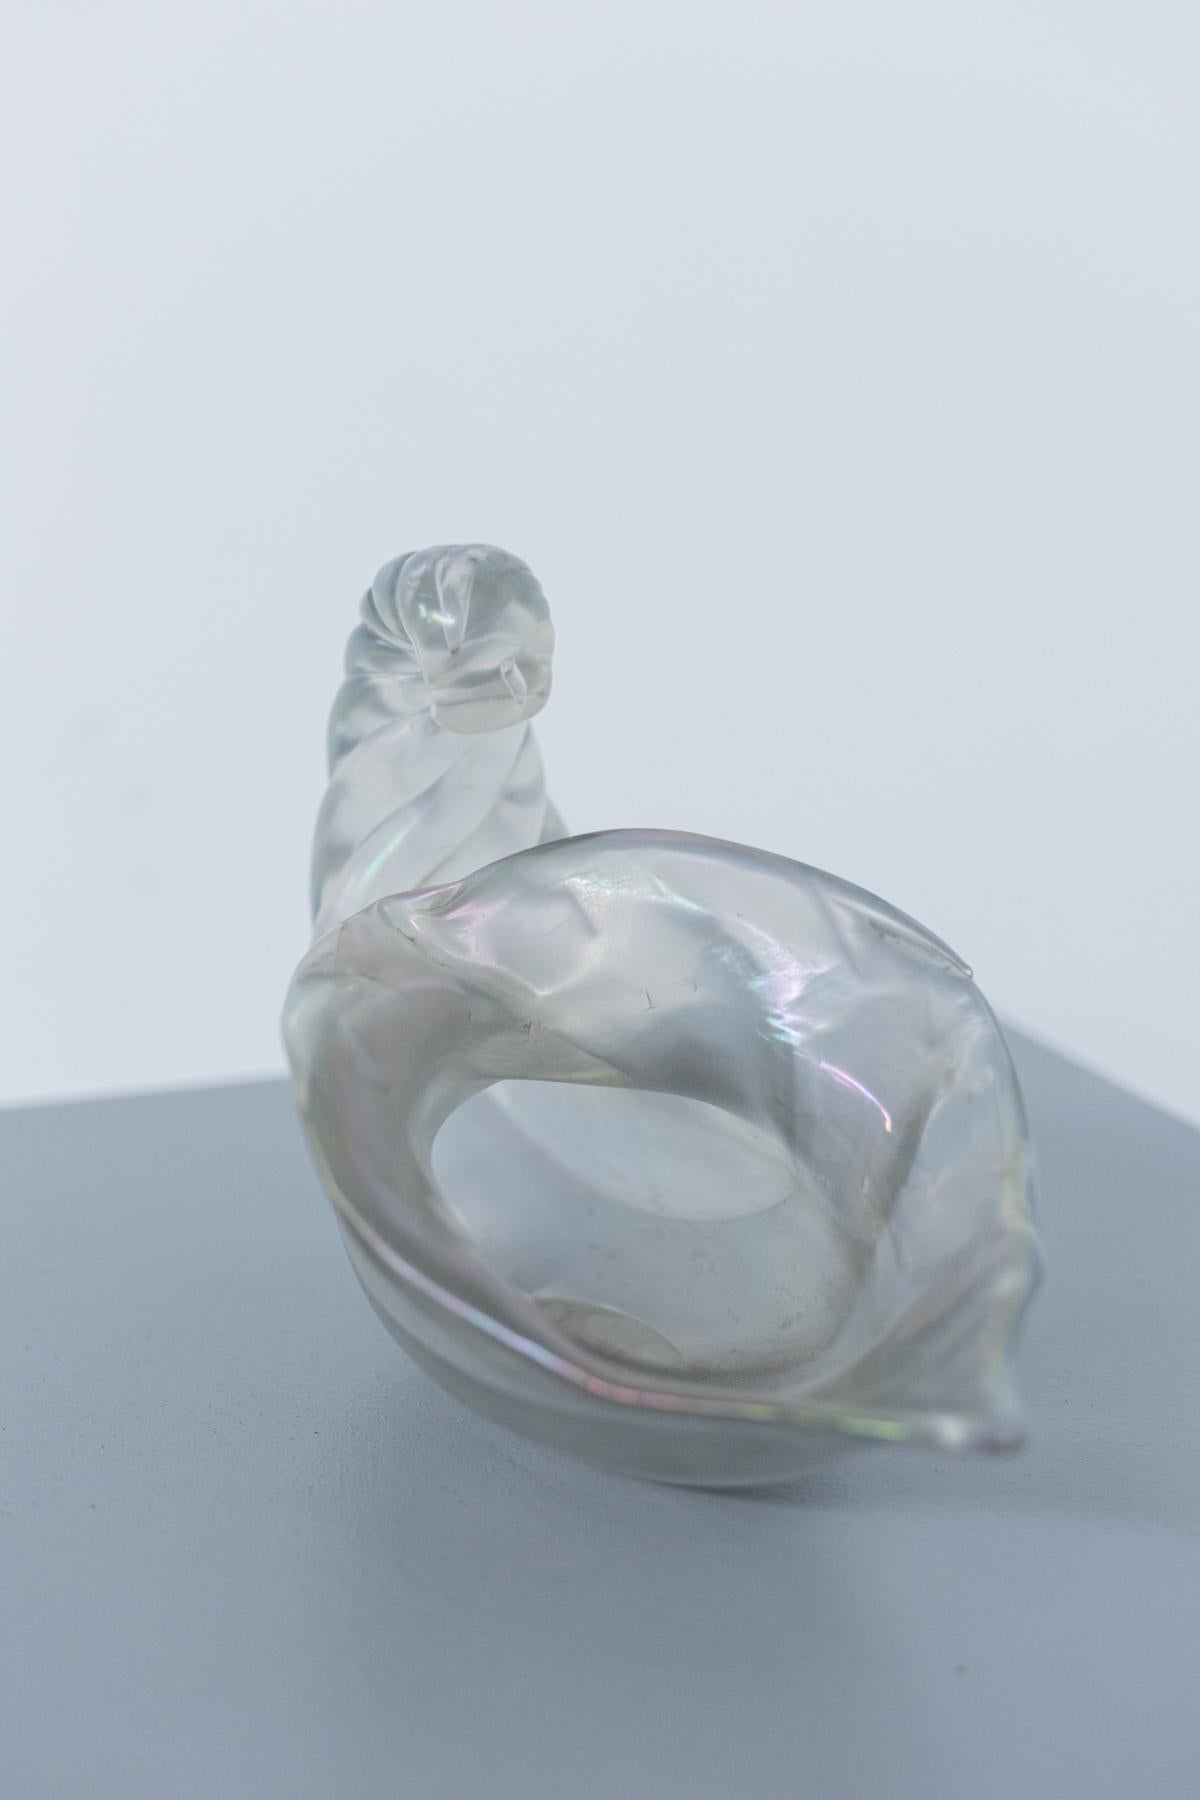 Wonderful transparent Murano glass cornucopia designed by Ercole Barovier in the 1930s.
Beautiful shape and particular transparent workmanship of the Iridato glass. 
Its shell effect gives a majestic aura, but at the same time elegant.
It is